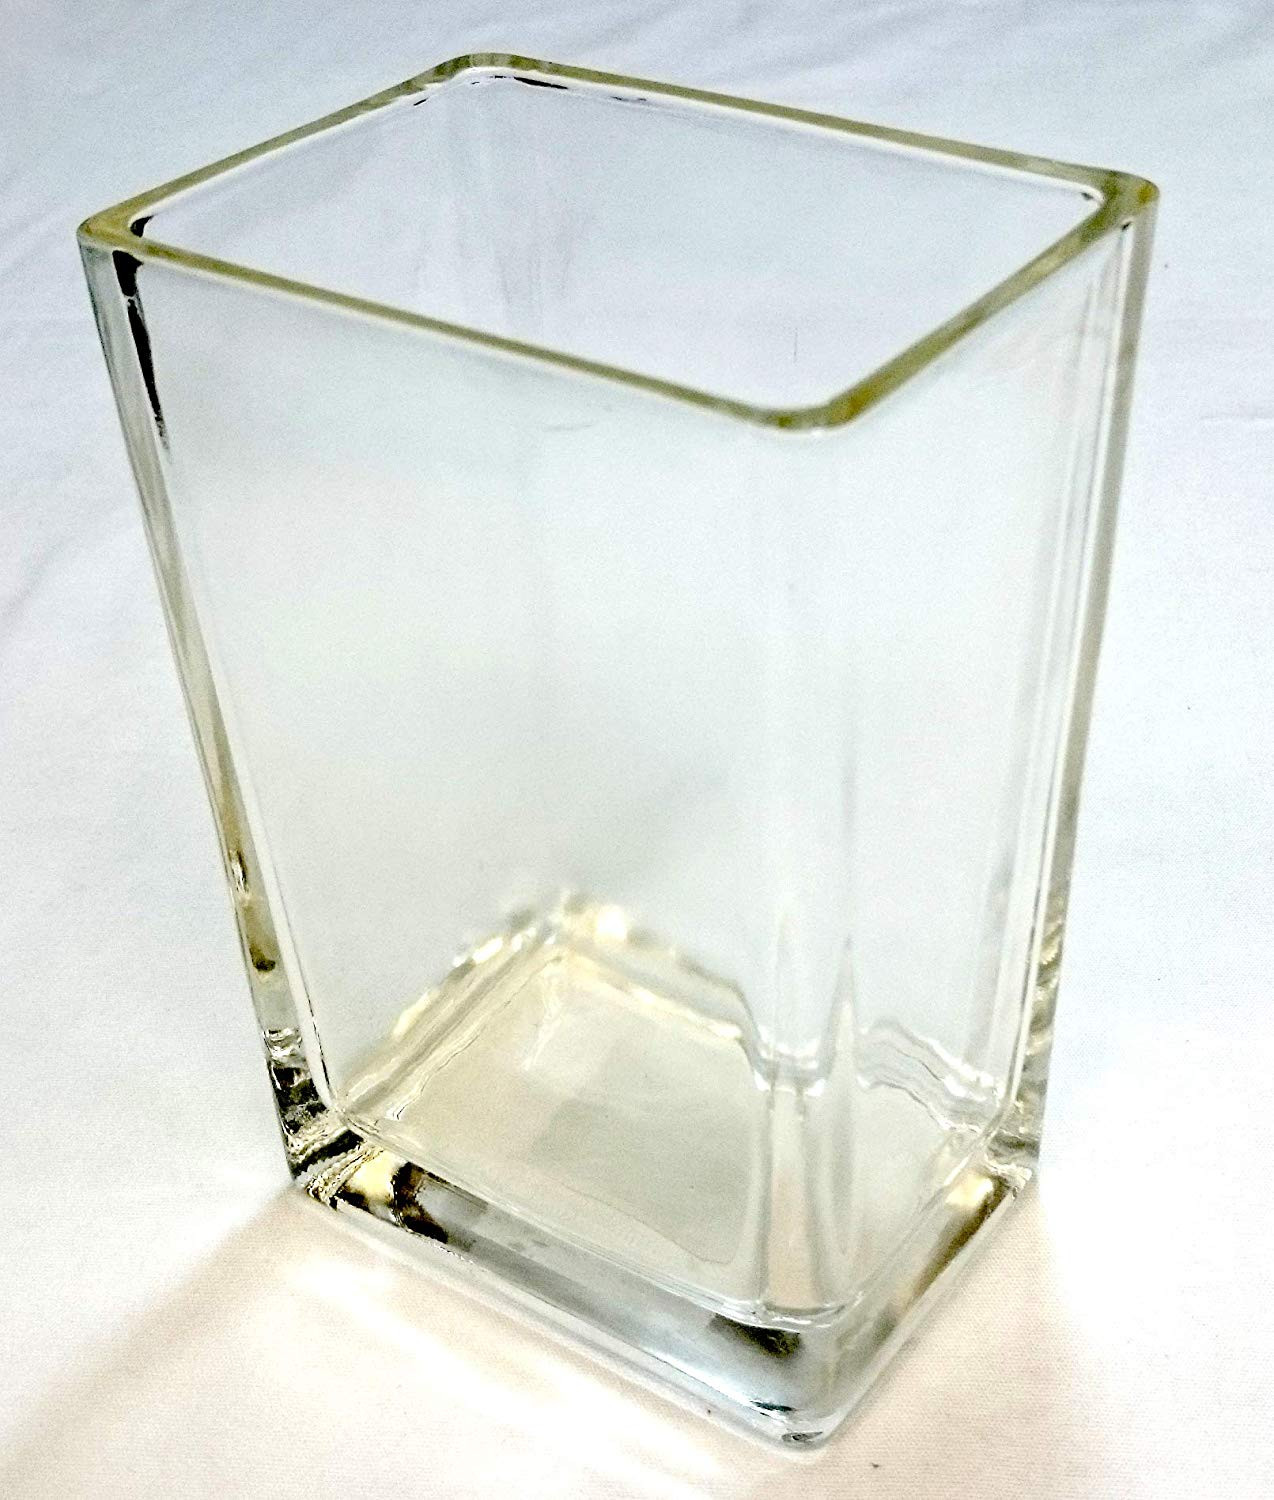 23 Awesome 4 Inch Glass Vase 2023 free download 4 inch glass vase of amazon com concord global trading 6 rectangle 3x4 base glass vase within amazon com concord global trading 6 rectangle 3x4 base glass vase six inch high tapered clear pi